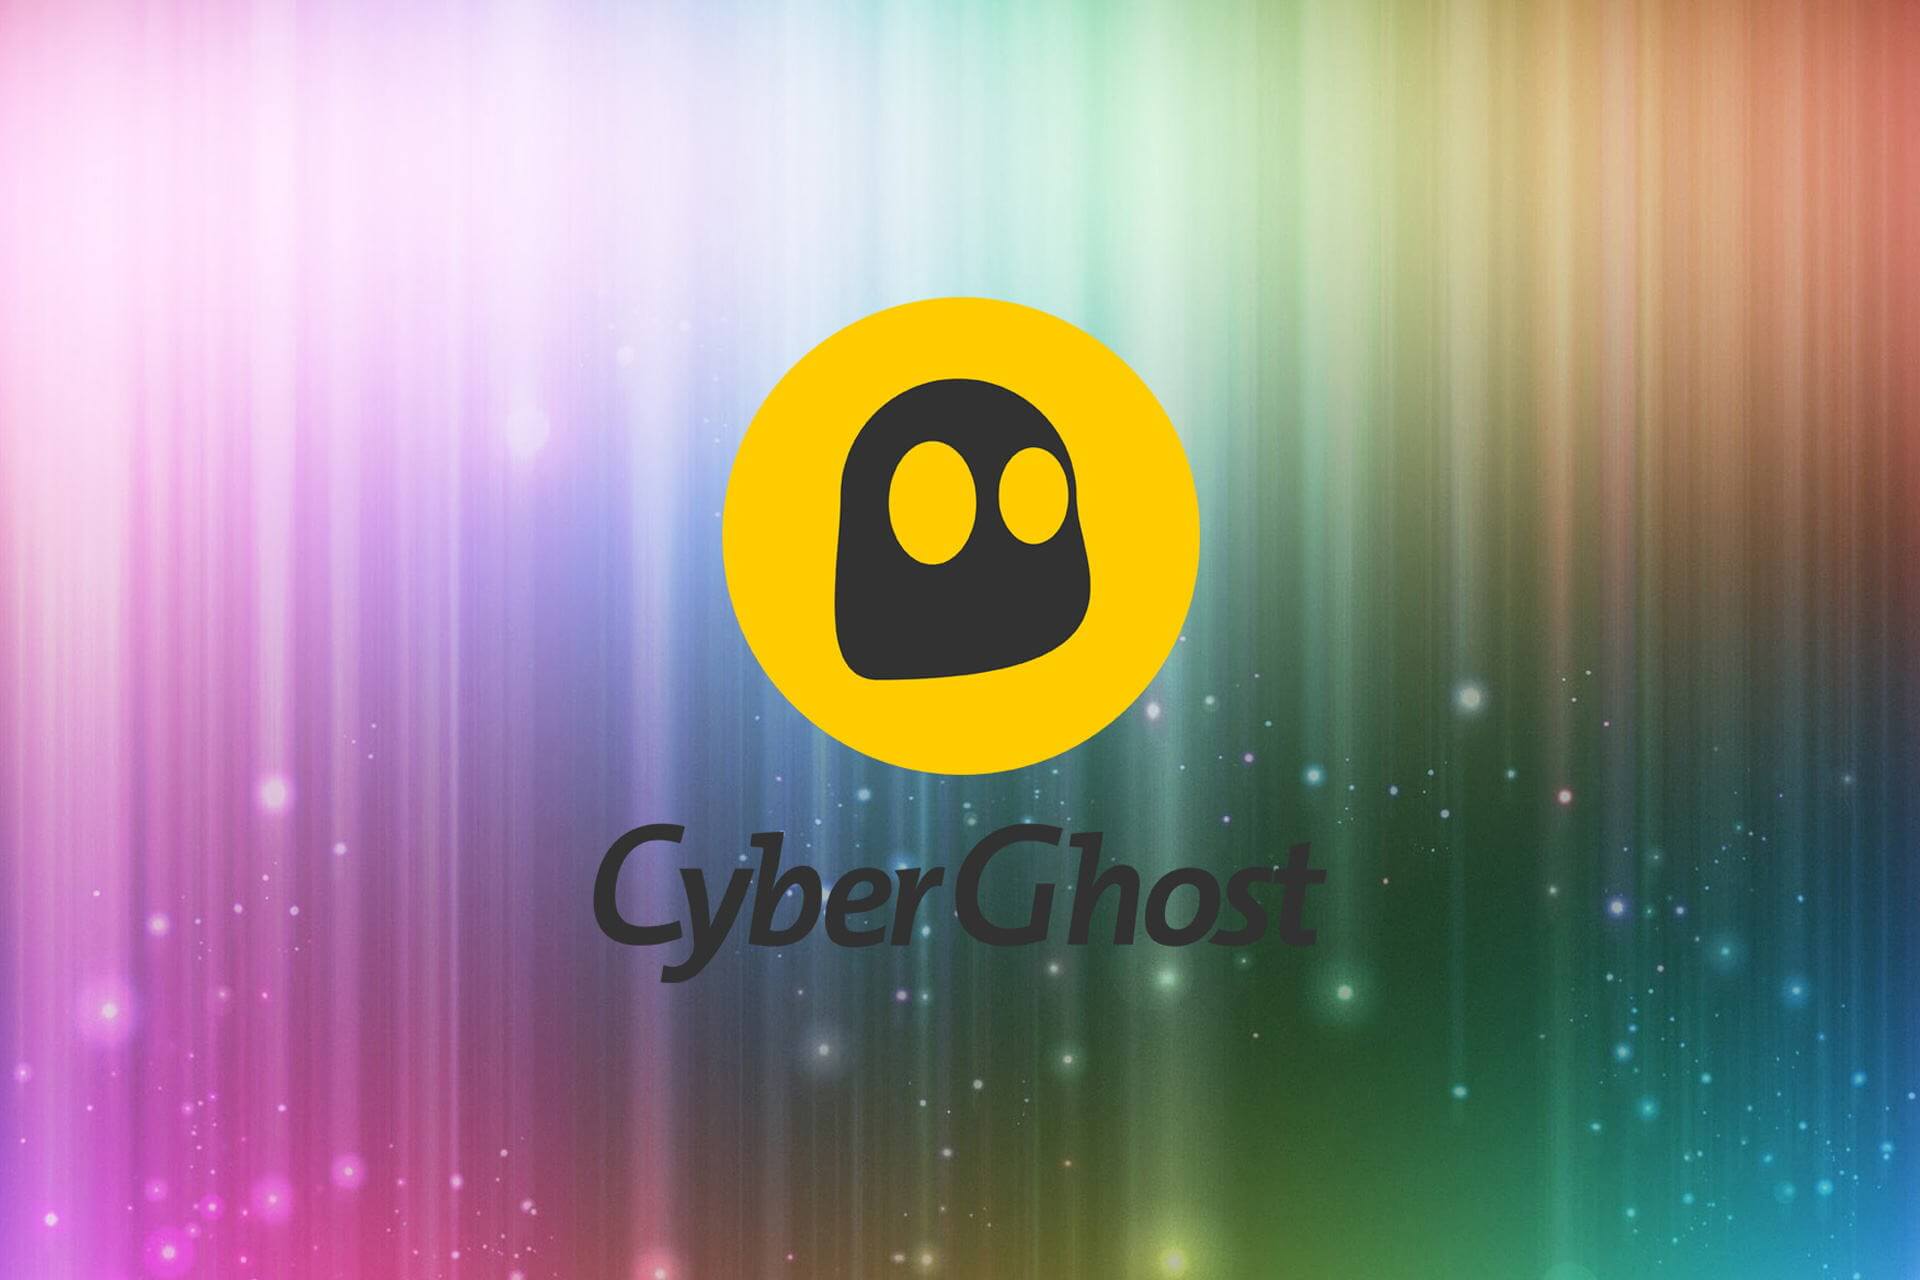 install CyberGhost now